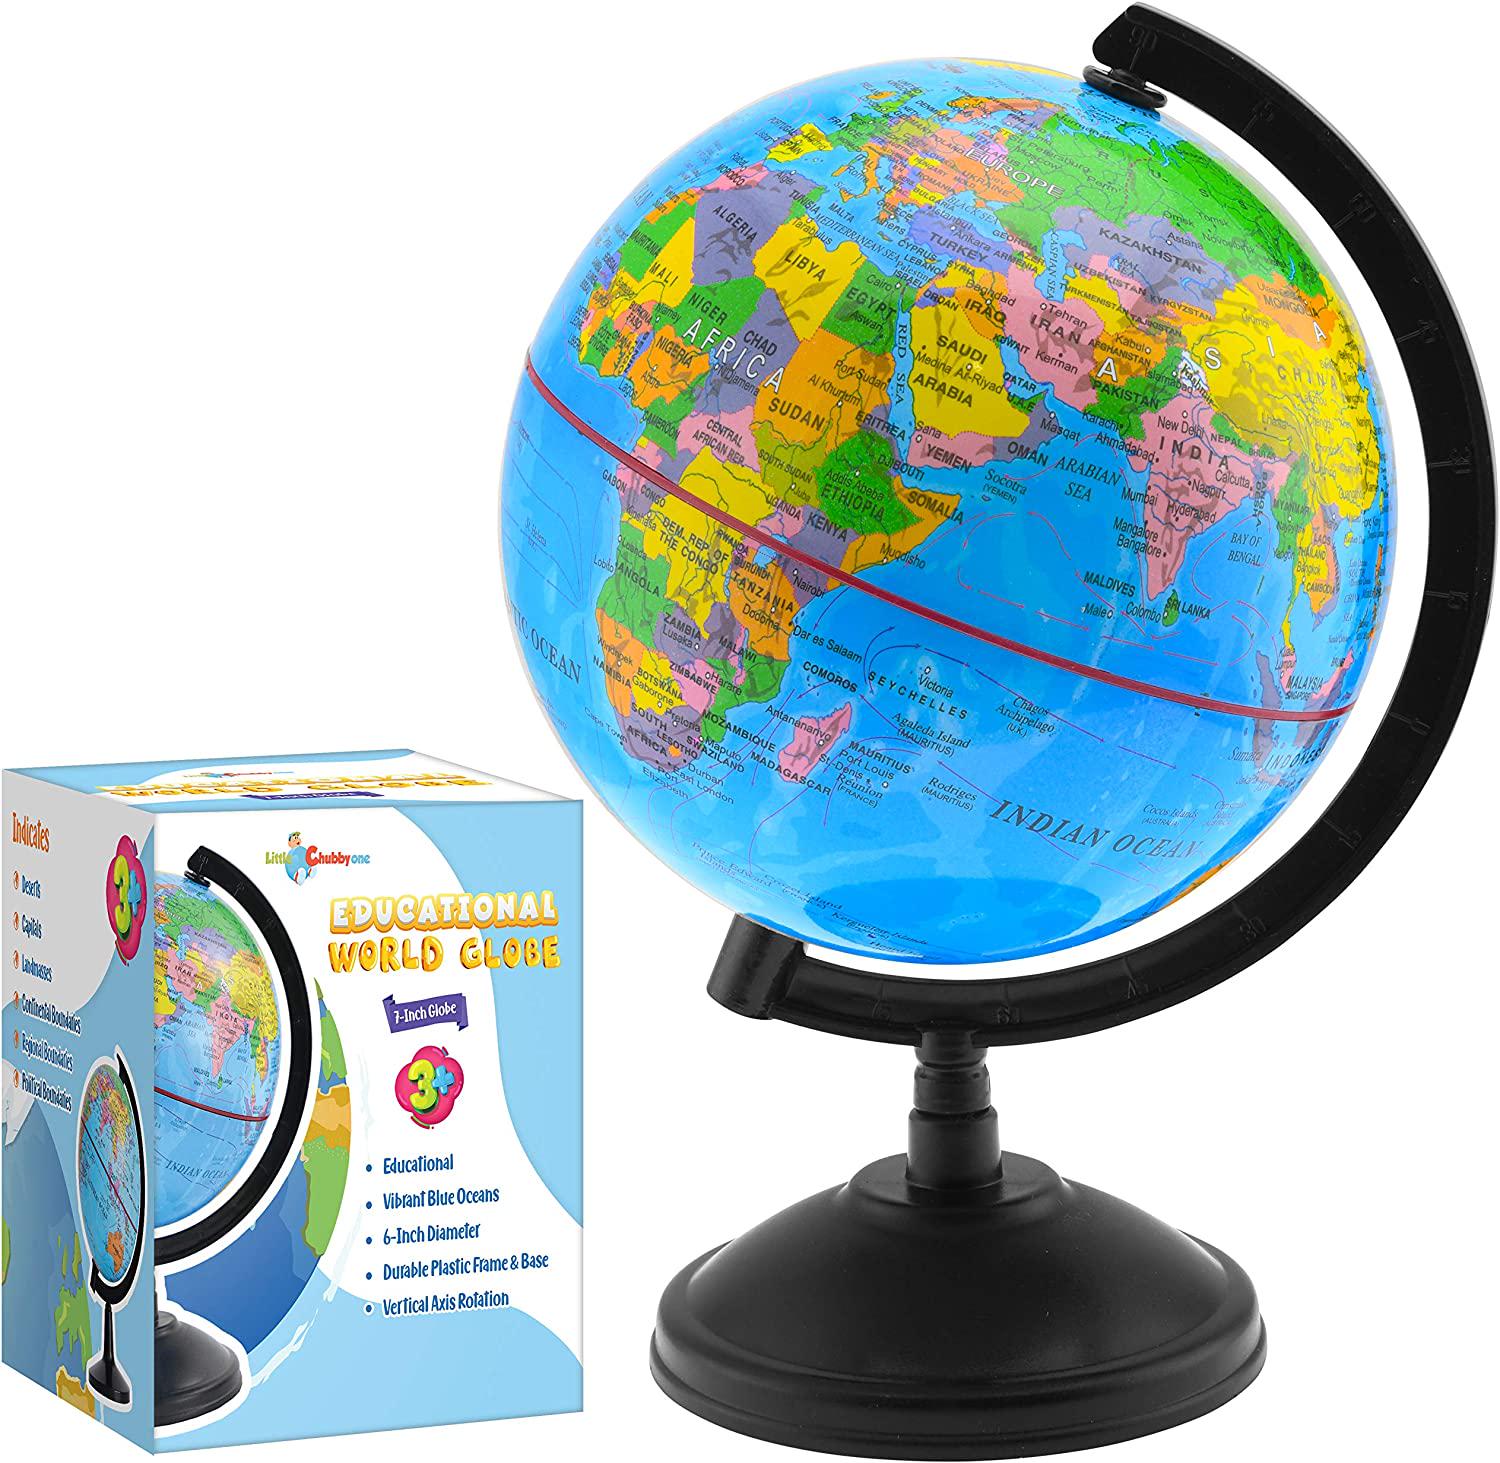 LITTLE CHUBBY ONE, Little Chubby One 7-inch Educational World Globe - Educational and Decorative Piece - Colorful Informative Easy to Read Spinning Globe Ideal for Learning Geography and Perfect Decor for Kids Room